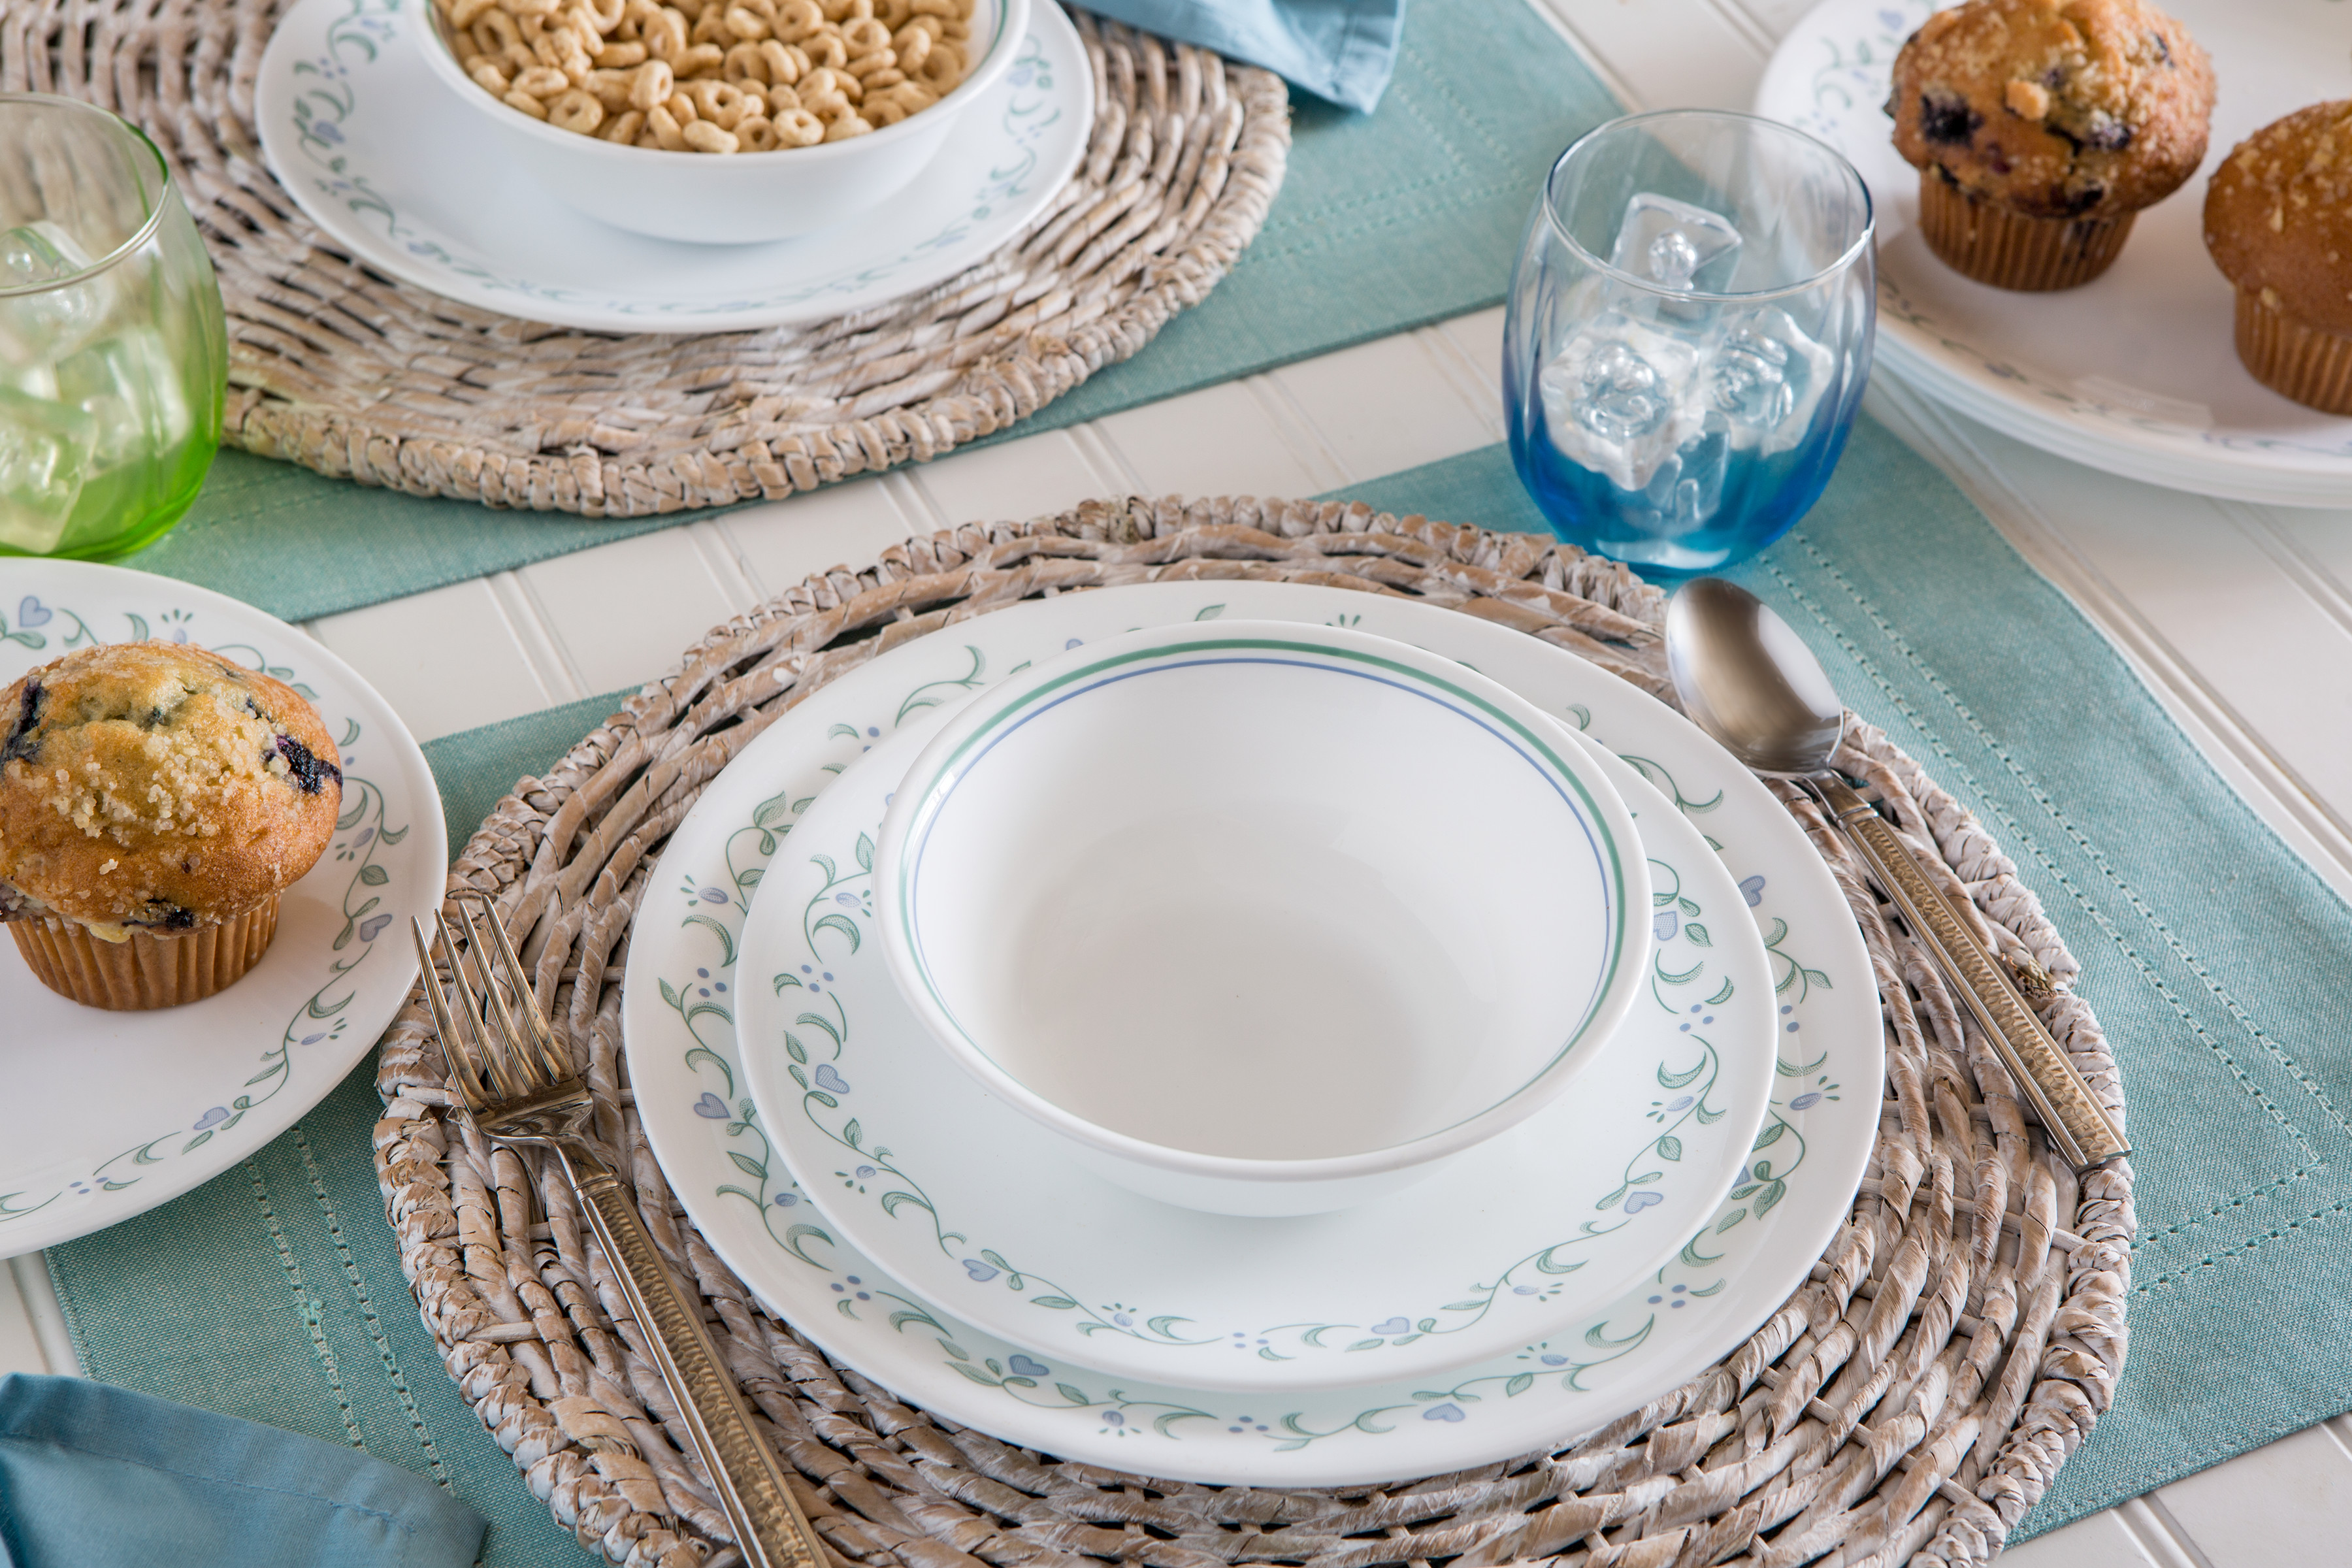 Corelle Classic Country Cottage 16-Piece Dinnerware Set, White, Blue - image 4 of 4